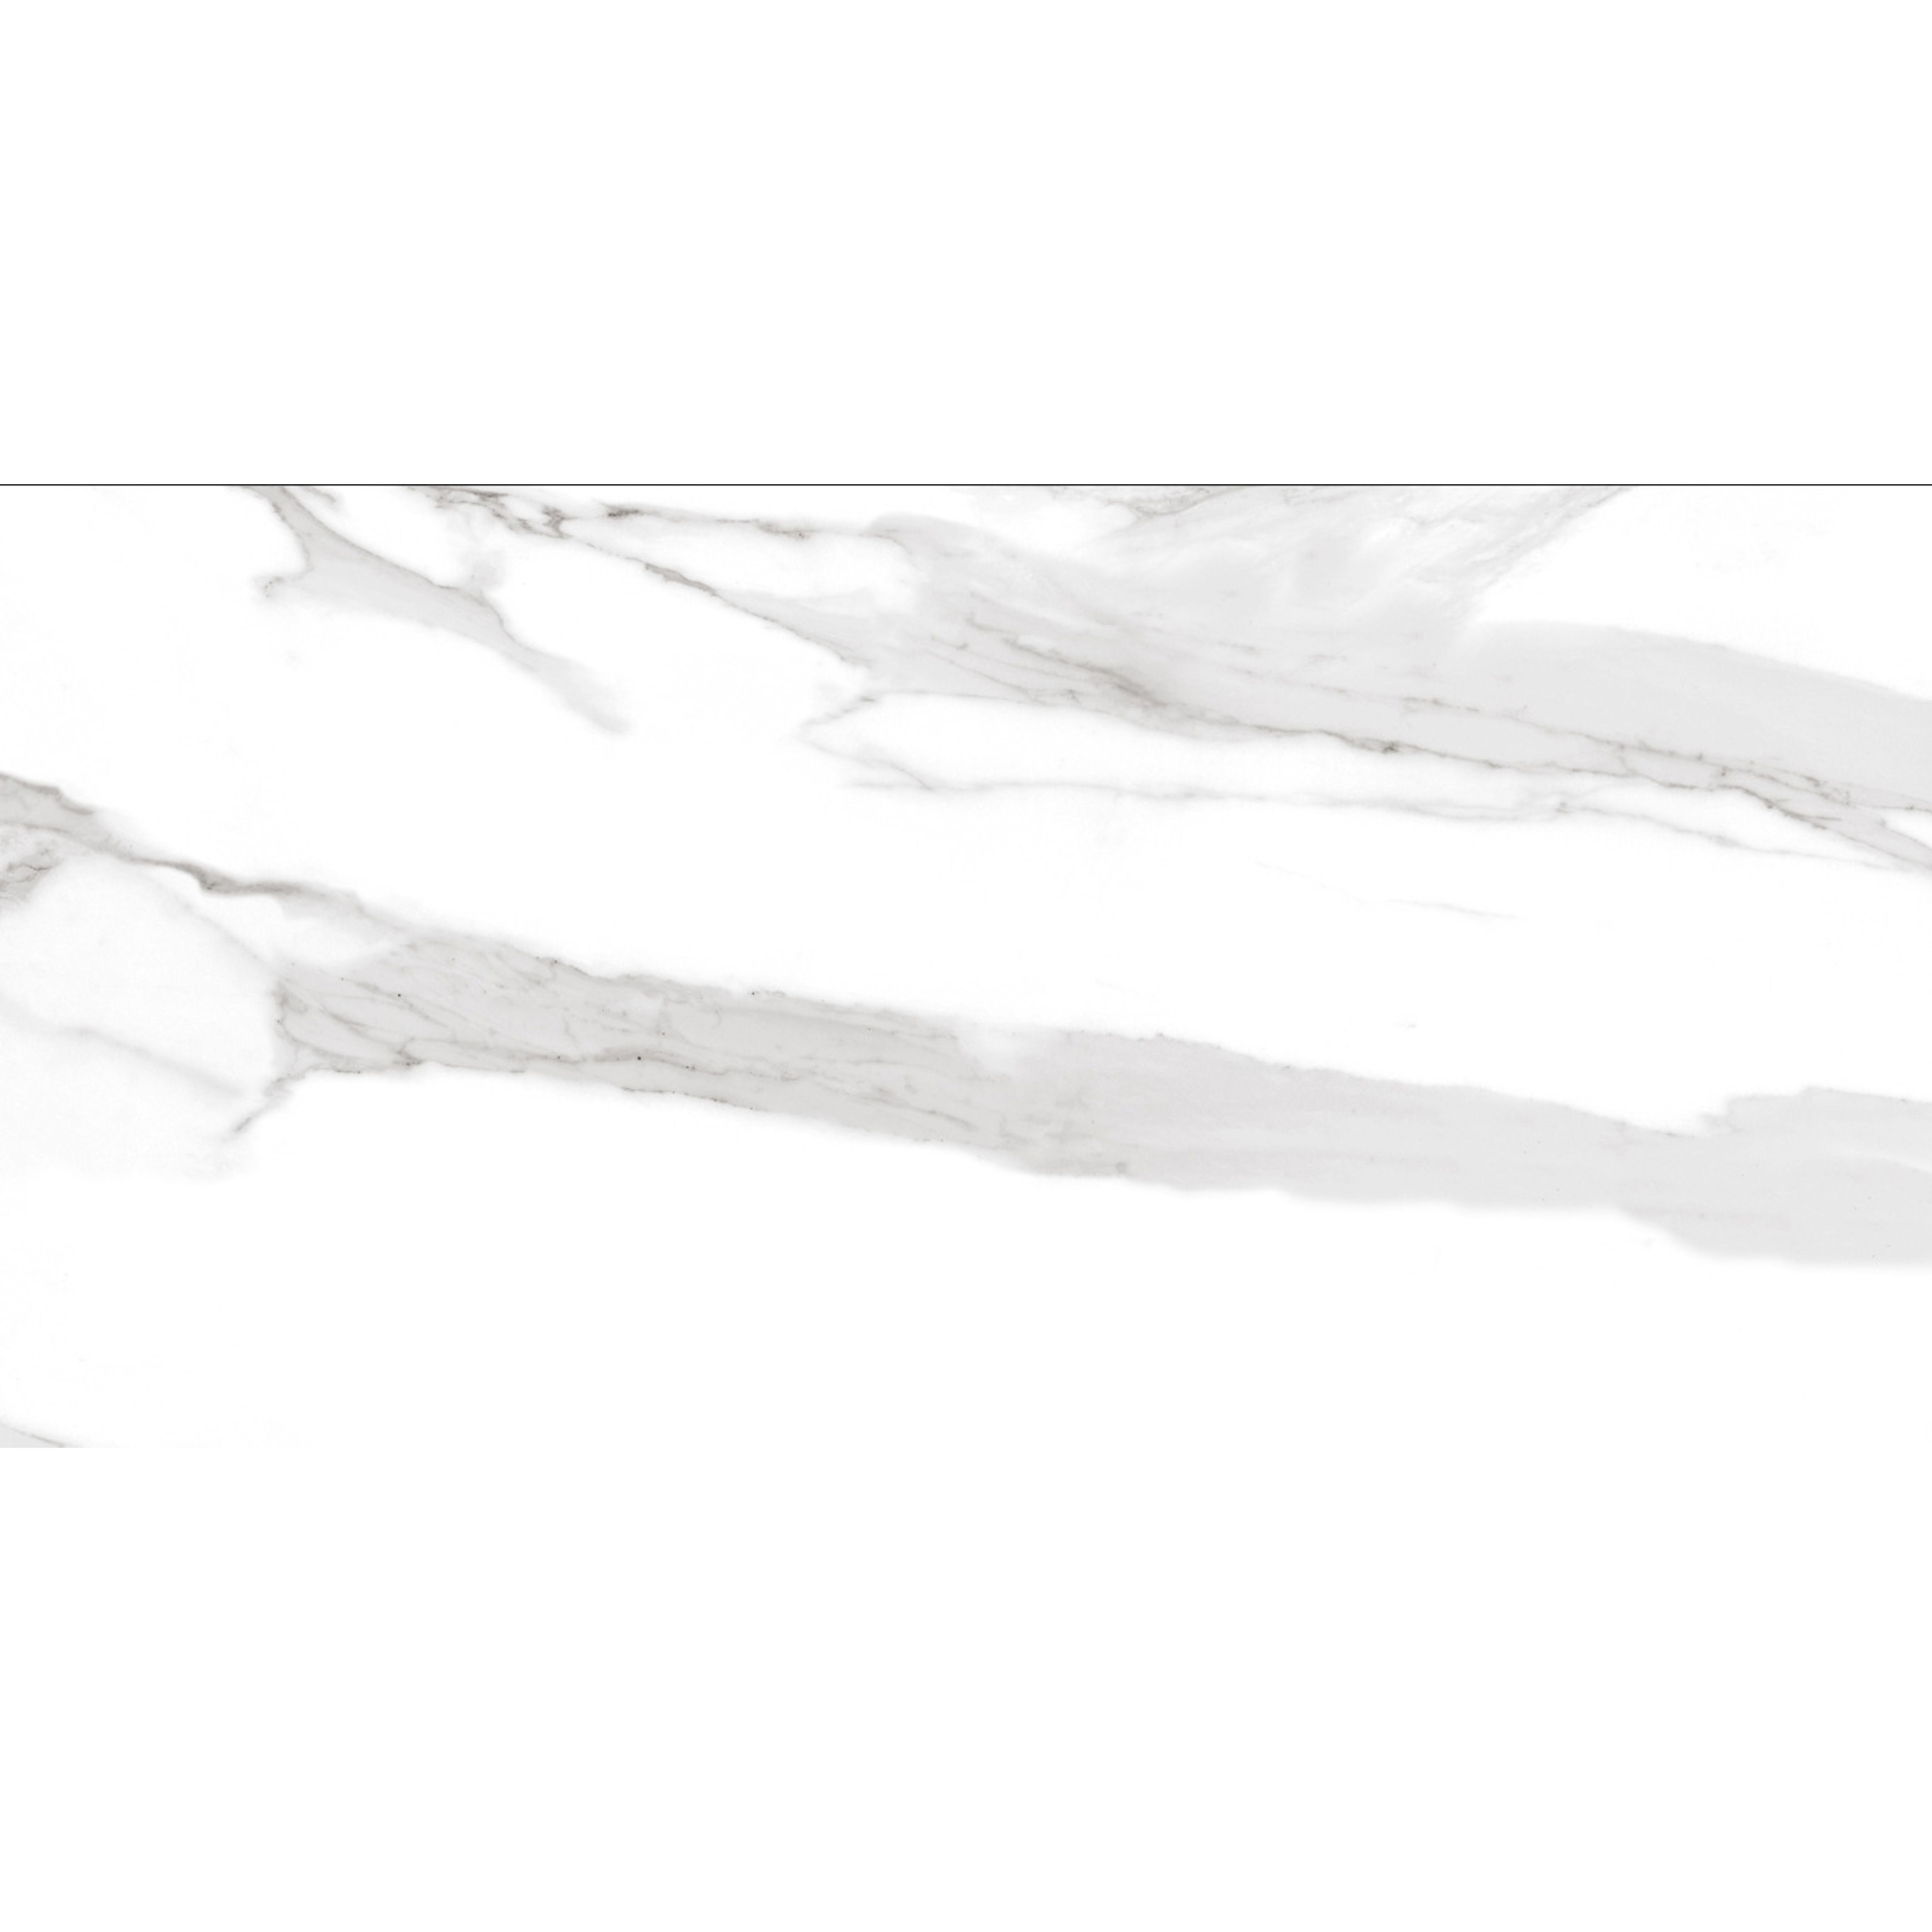 Duratile Designs Calacatta Ice White Gloss Marble effect Textured Porcelain Indoor Wall & floor Tile Sample